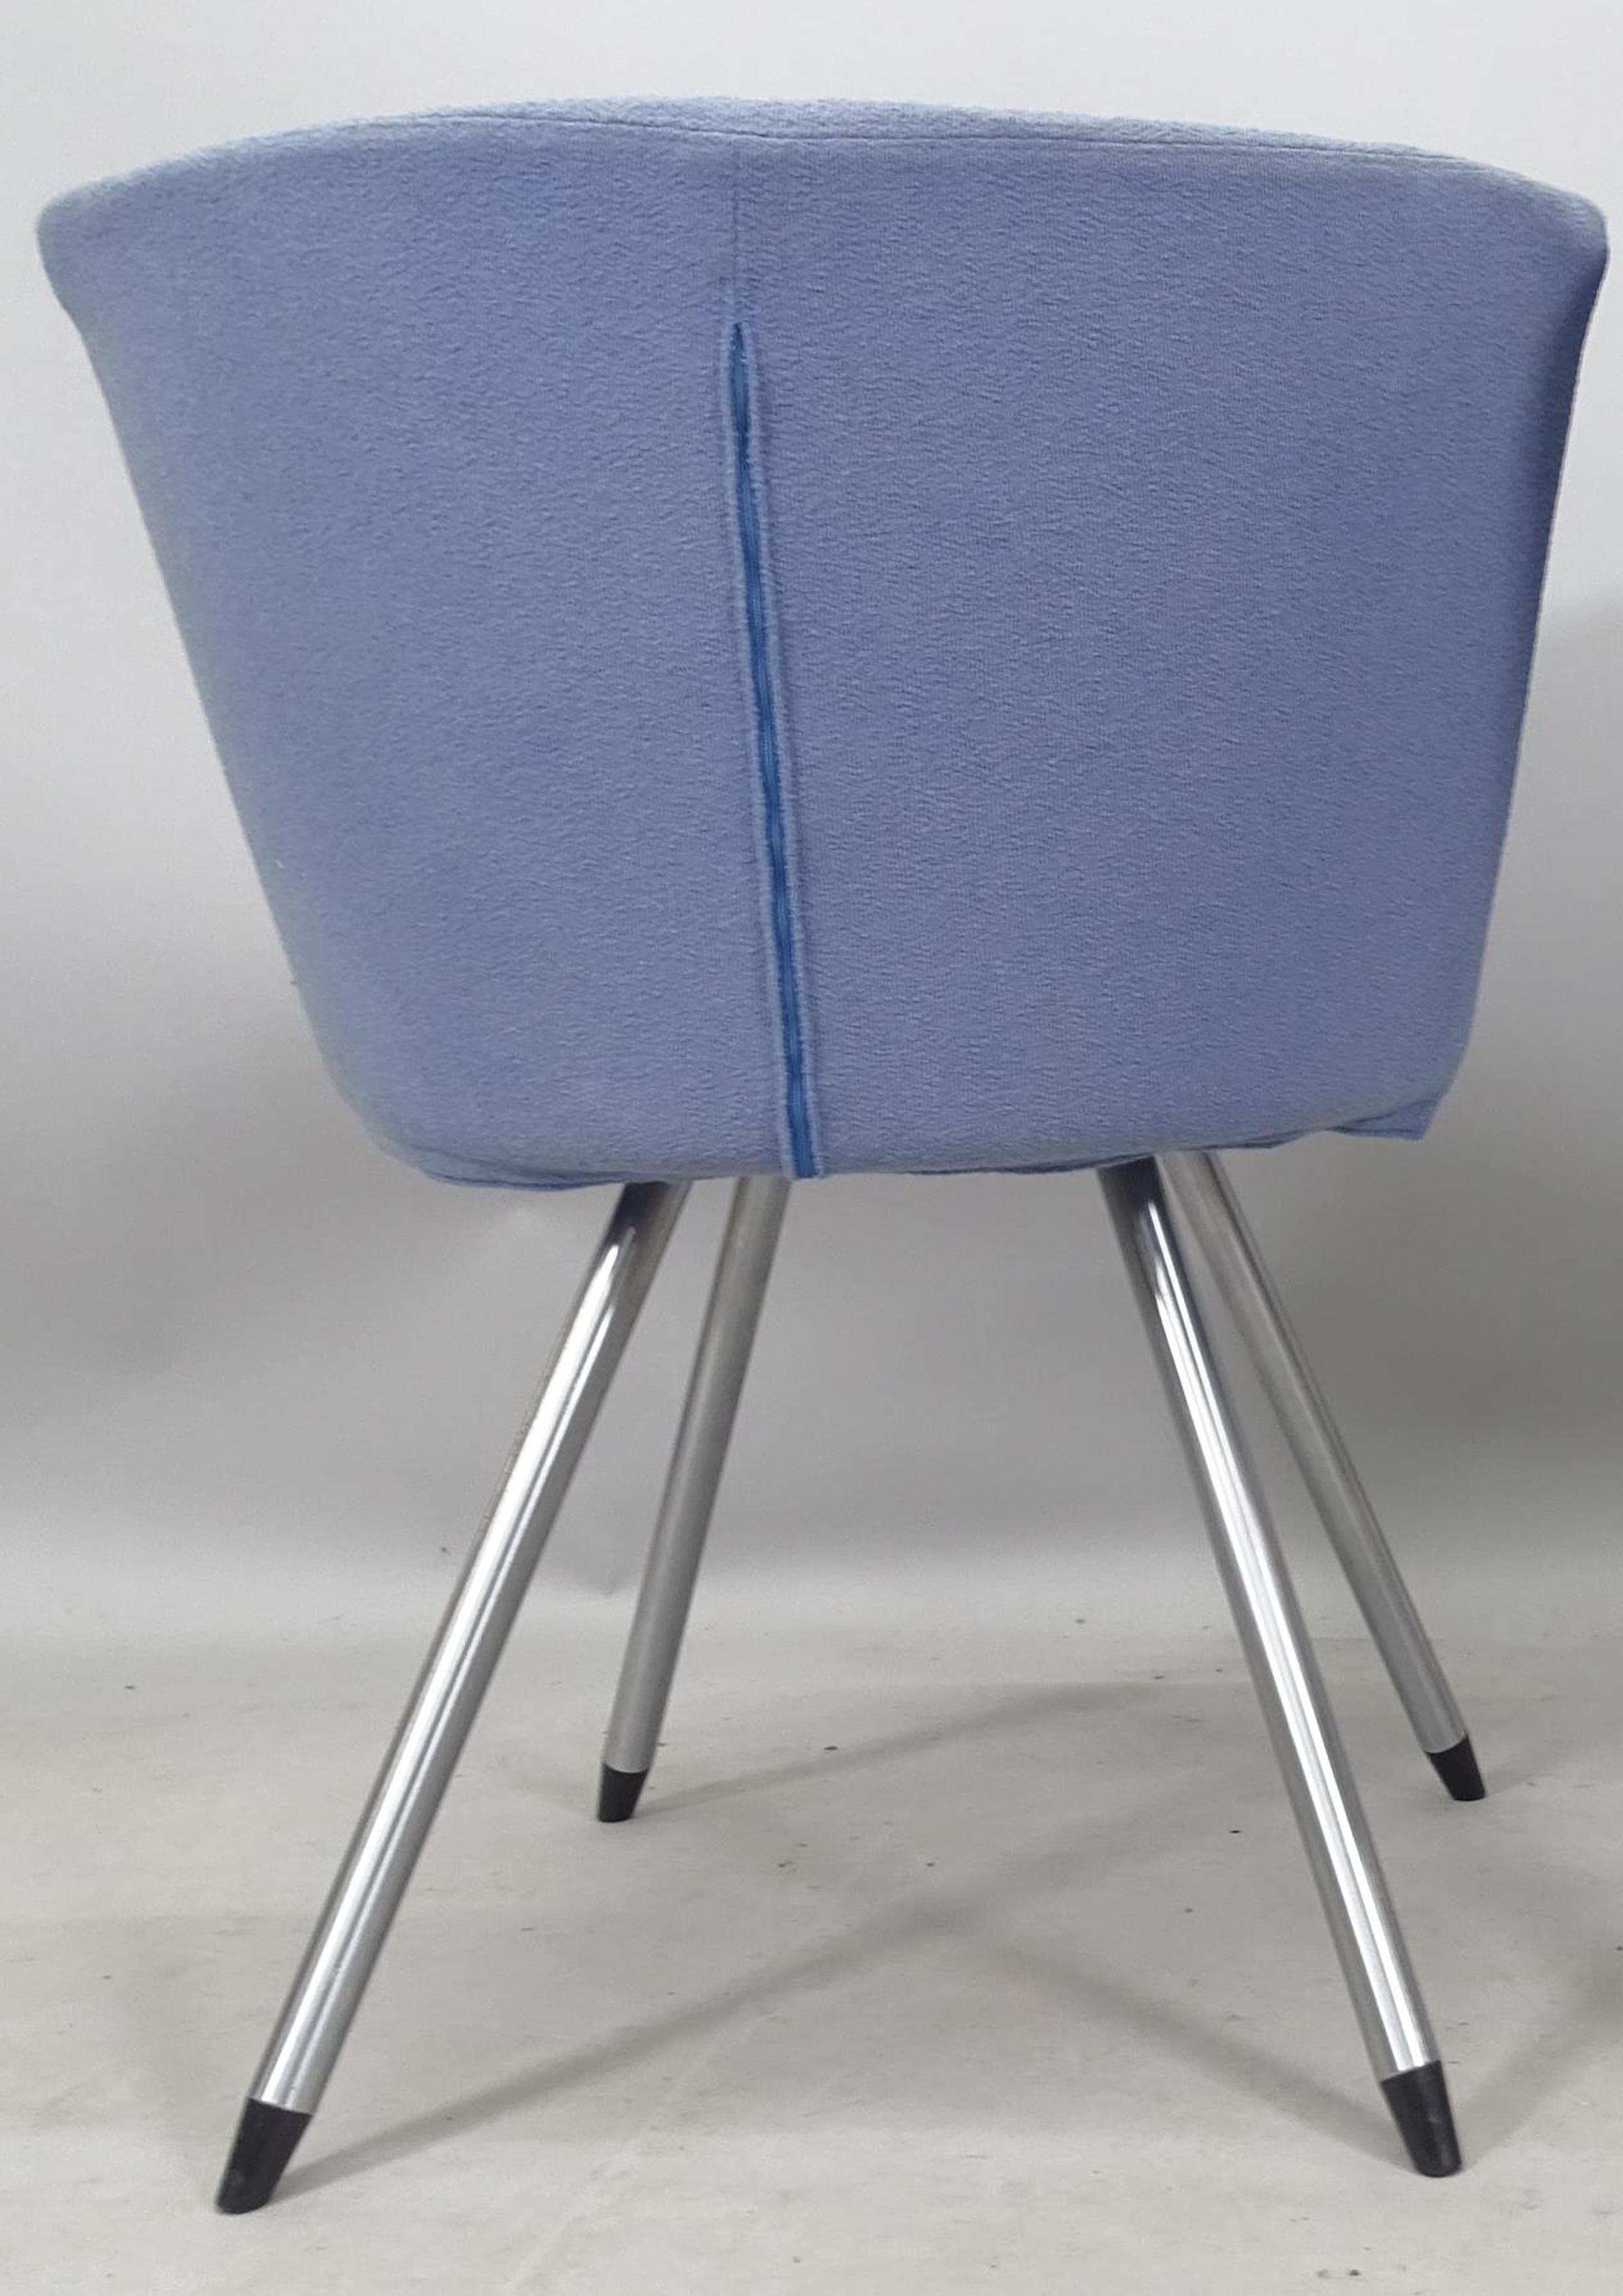 A Pair of Blue Cocktail Chairs Model Ej11 by Team Foersom & Hiort Lorenzen In Good Condition For Sale In High Wycombe, GB